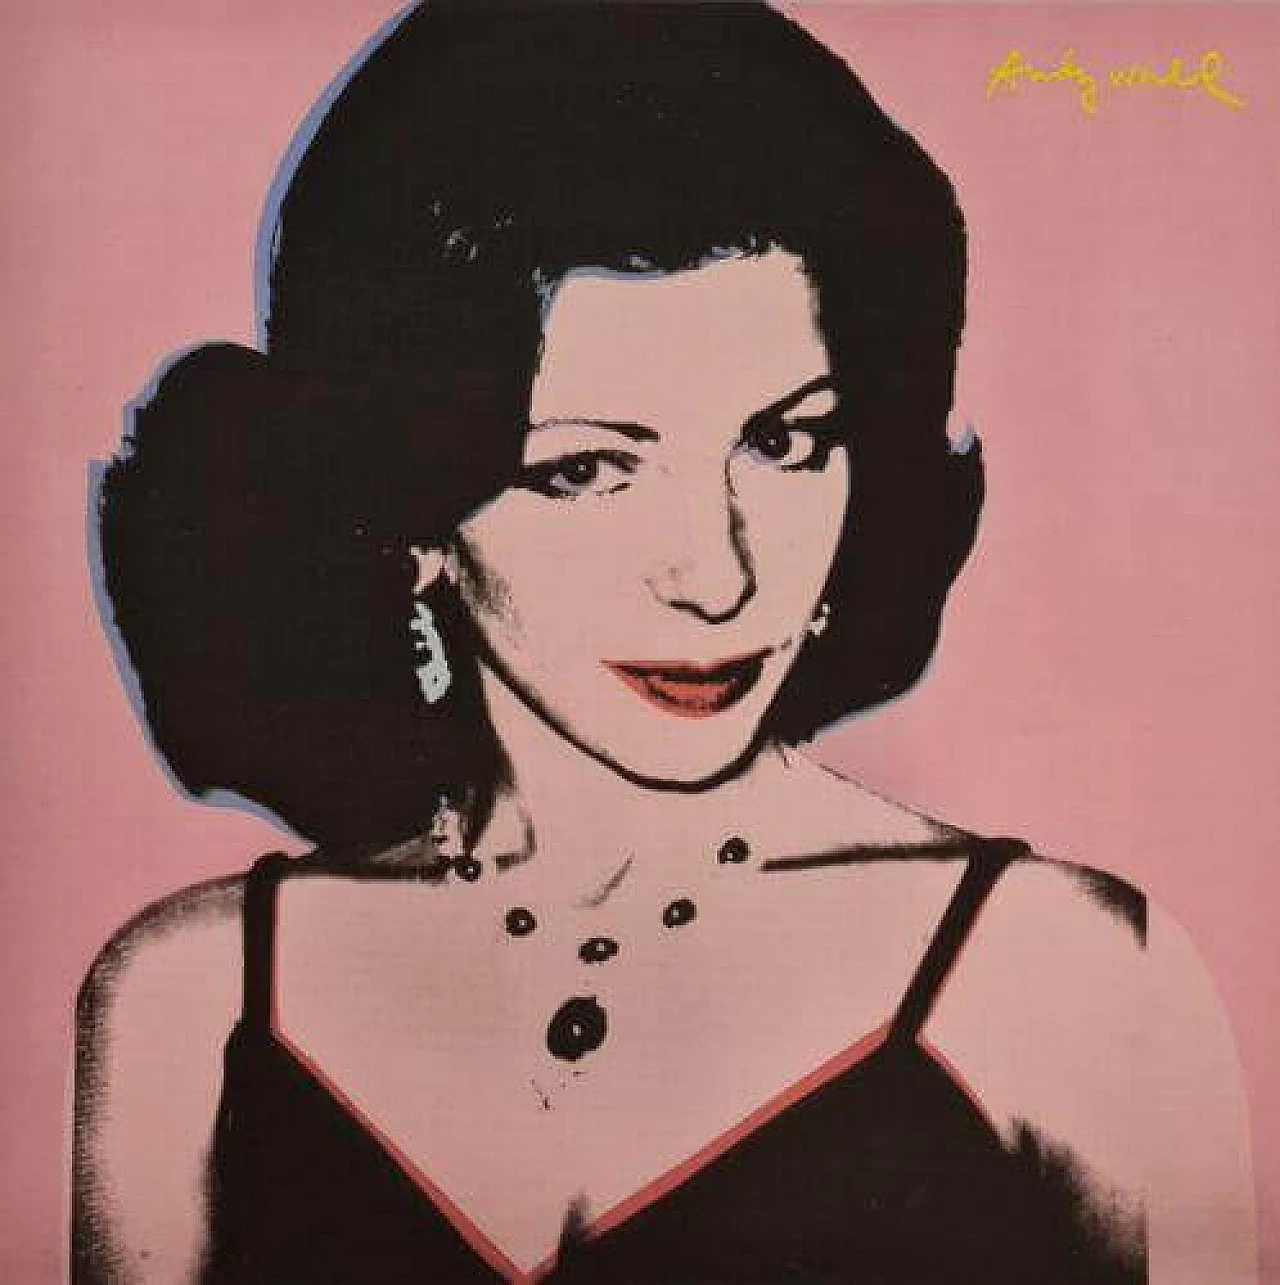 Female portrait, lithography, reproduction after Andy Warhol, 1980s 11